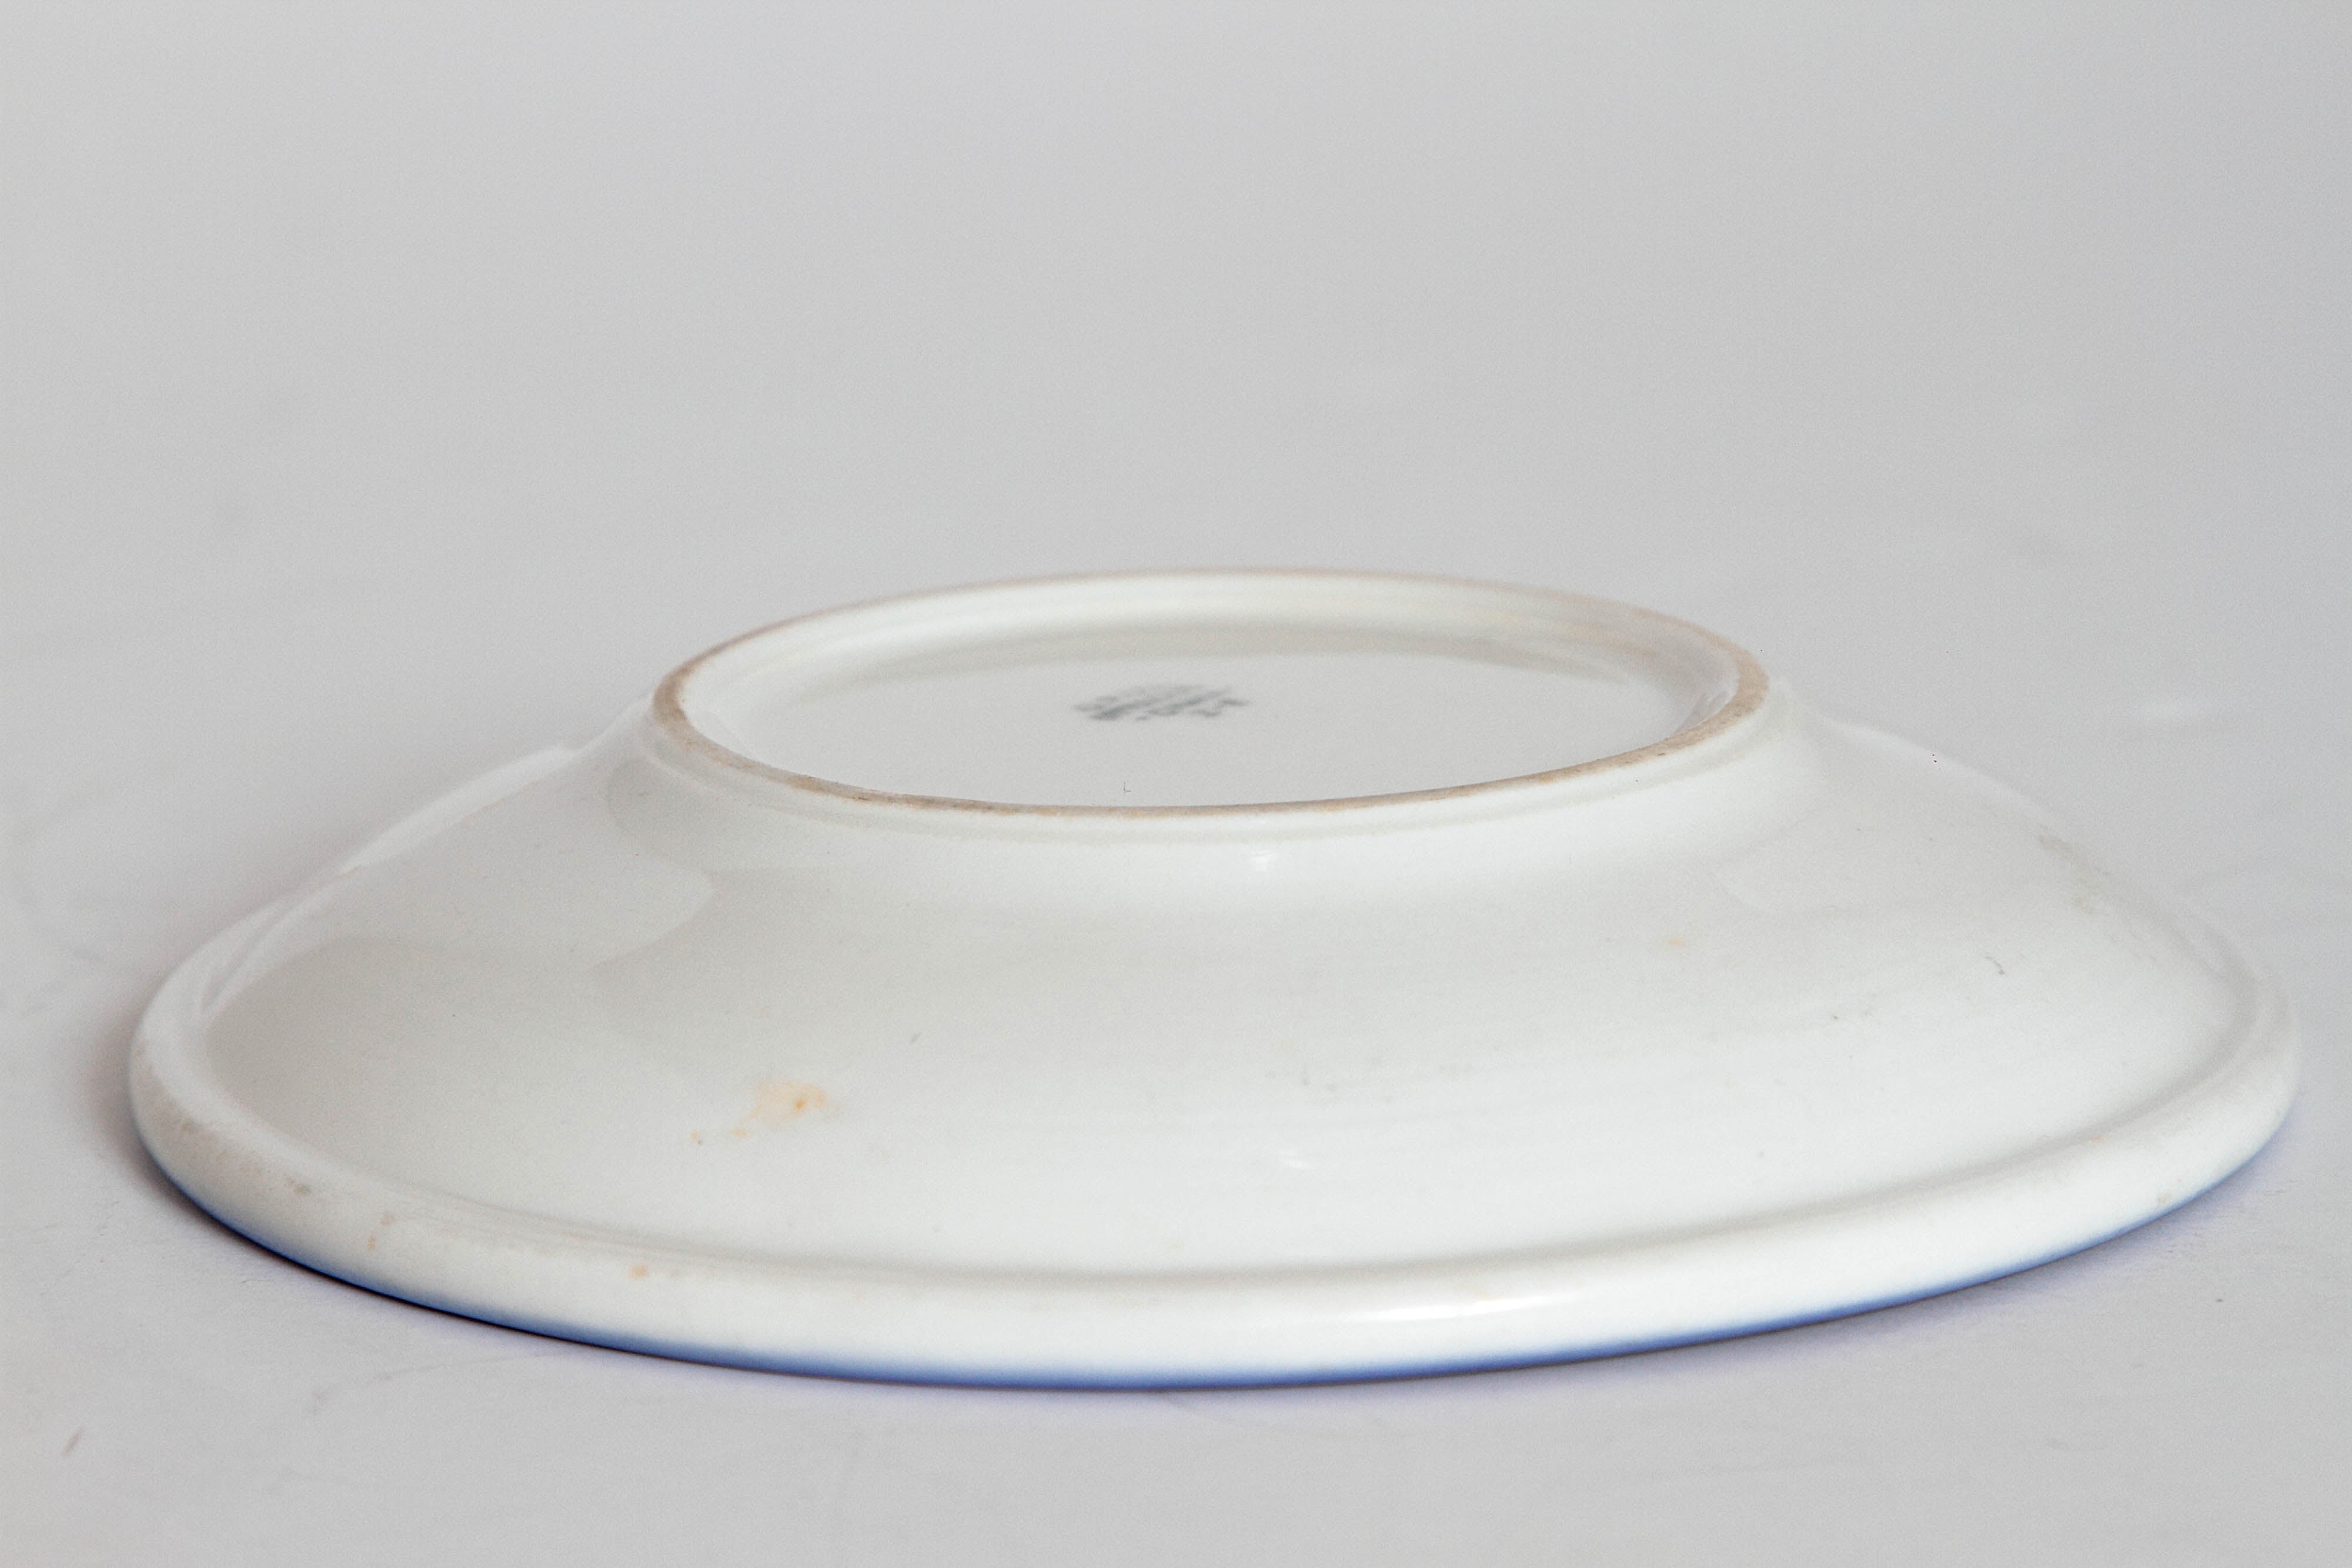 American 1940s Syracuse China Stylized DC 3 Saucer above Skyscraper City Scape For Sale